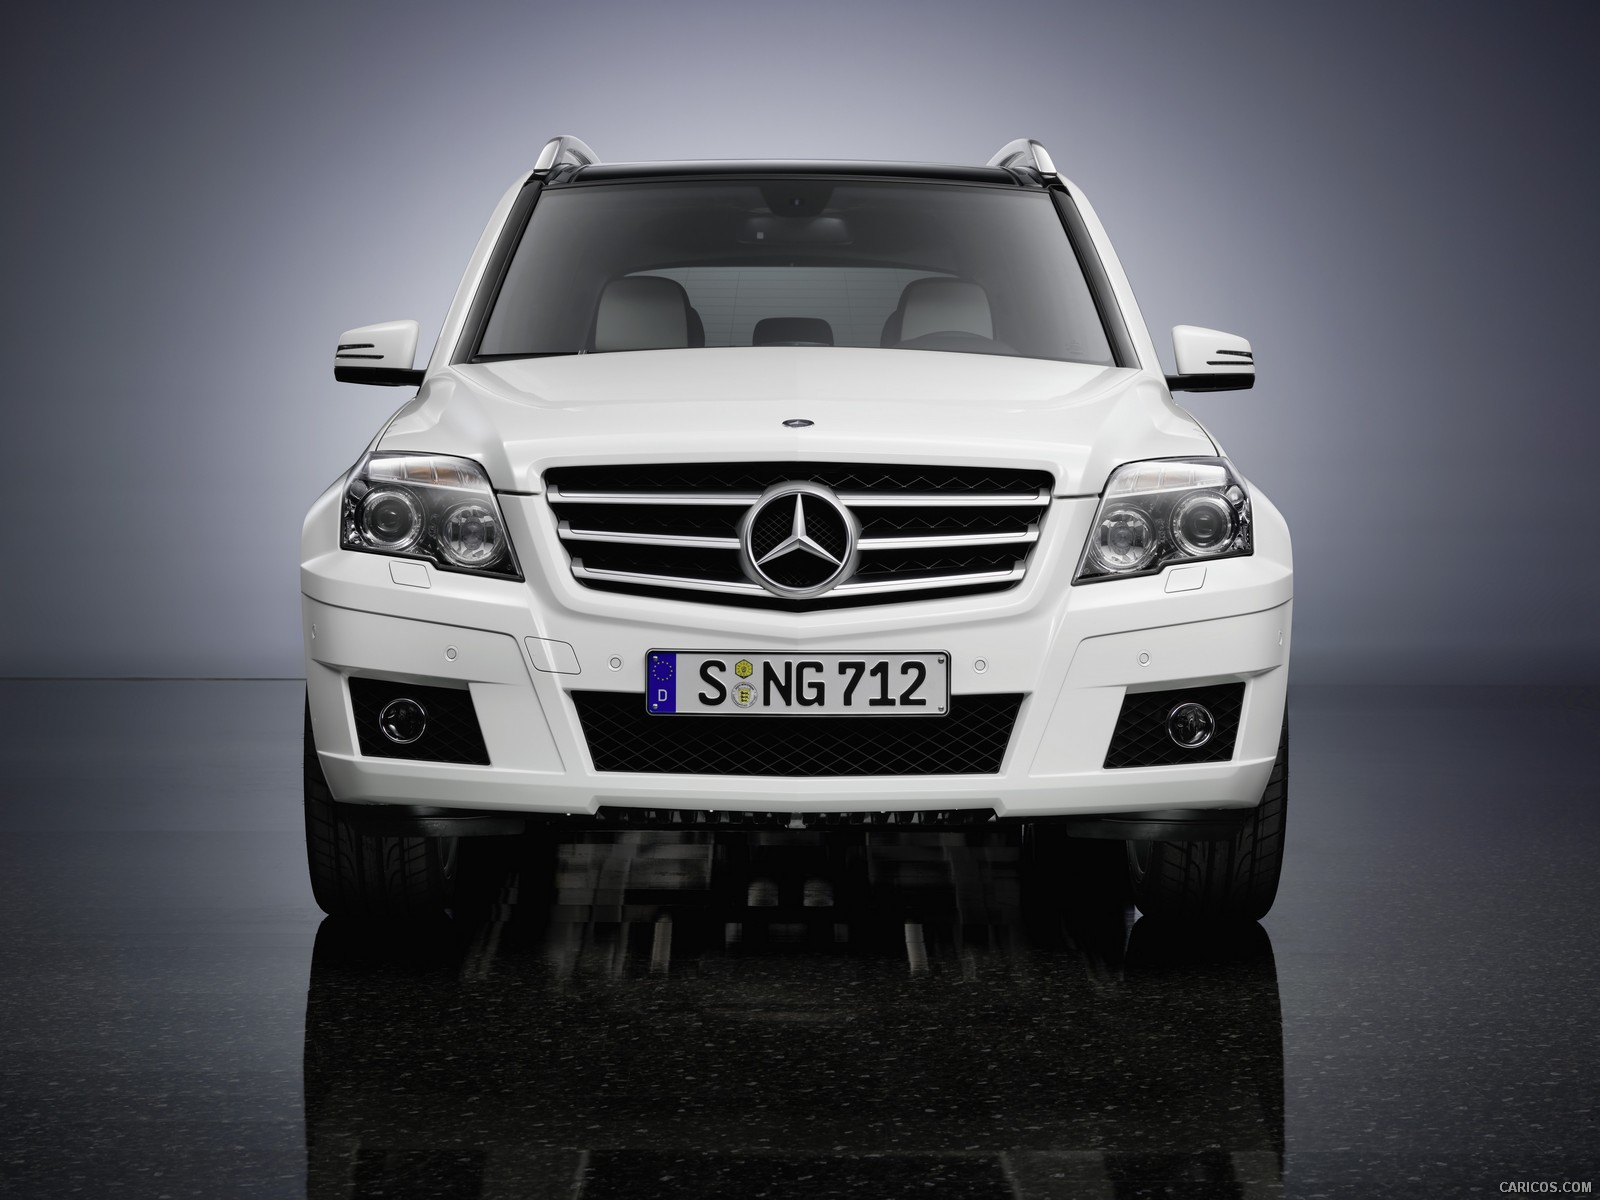 Mercedes-Benz GLK-Class  - Front Angle , #5 of 351